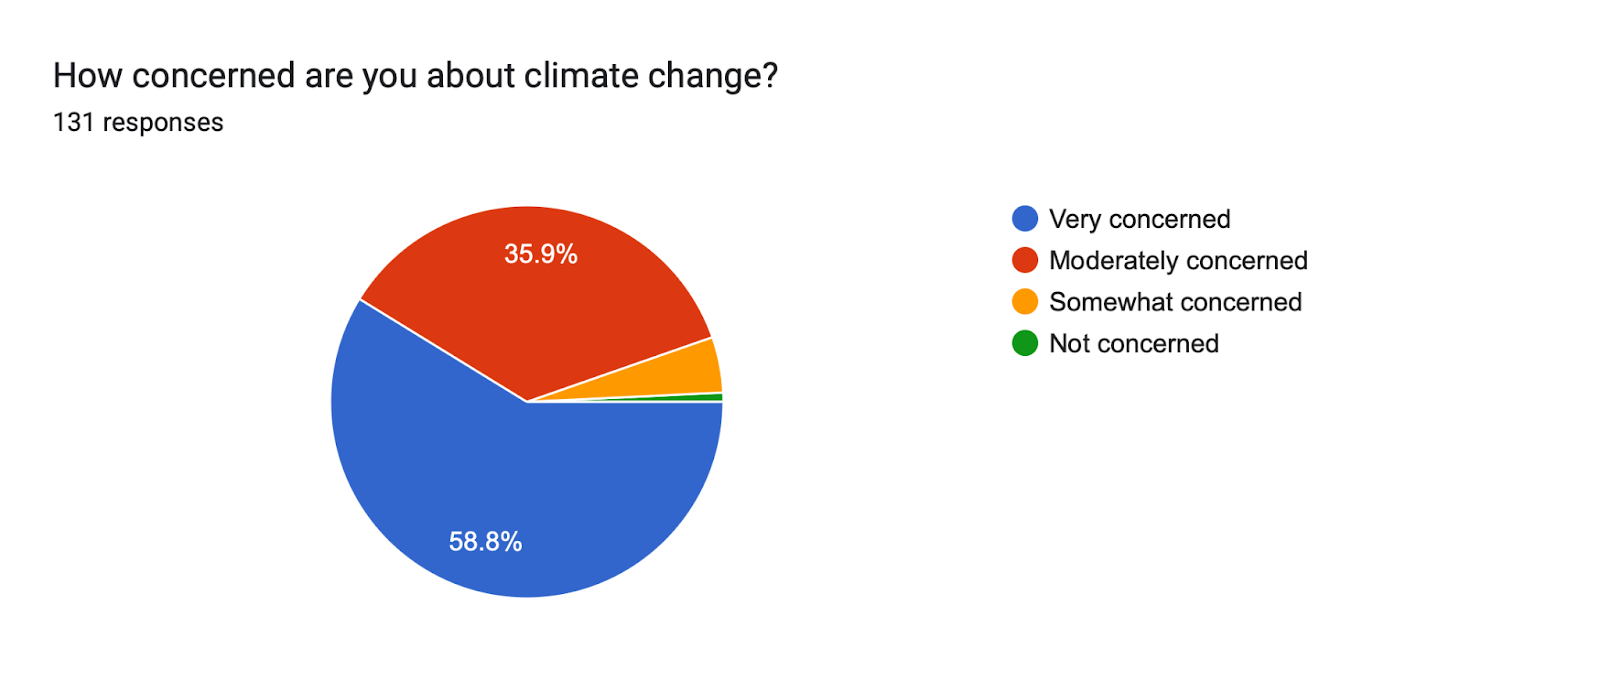 Forms response chart. Question title: How concerned are you about climate change?. Number of responses: 131 responses.